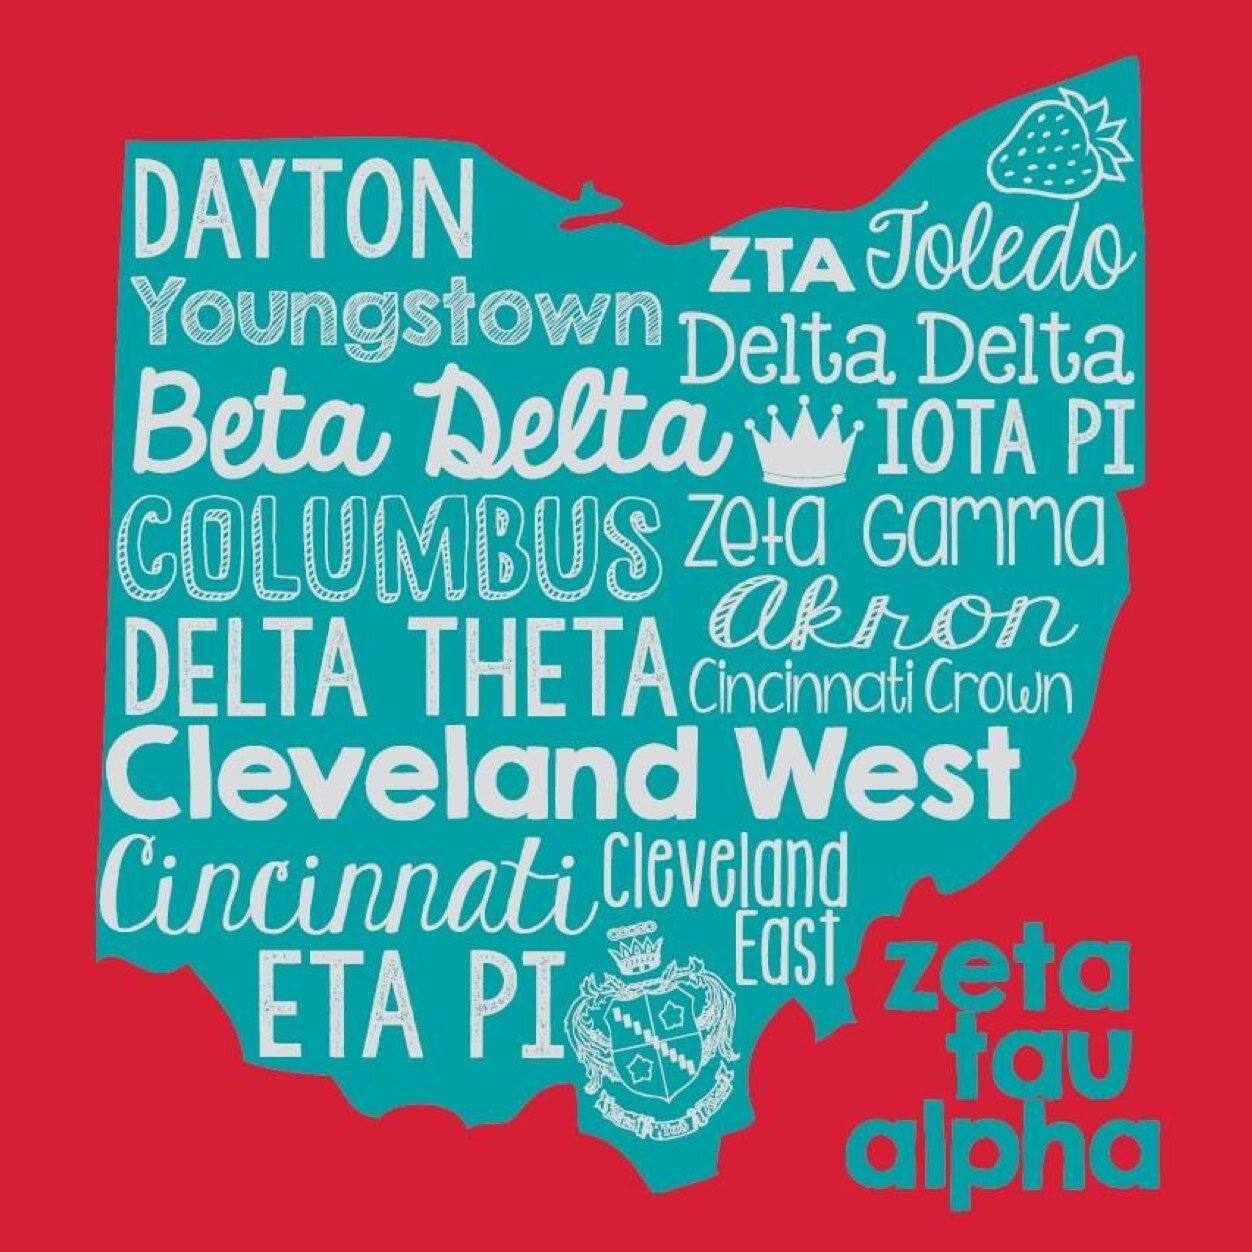 A place to connect Zeta Tau Alphas in the state of Ohio! We have 9 alumnae and 7 collegiate chapters! Email ohiodpzta@gmail.com for info. Zeta is Forever!